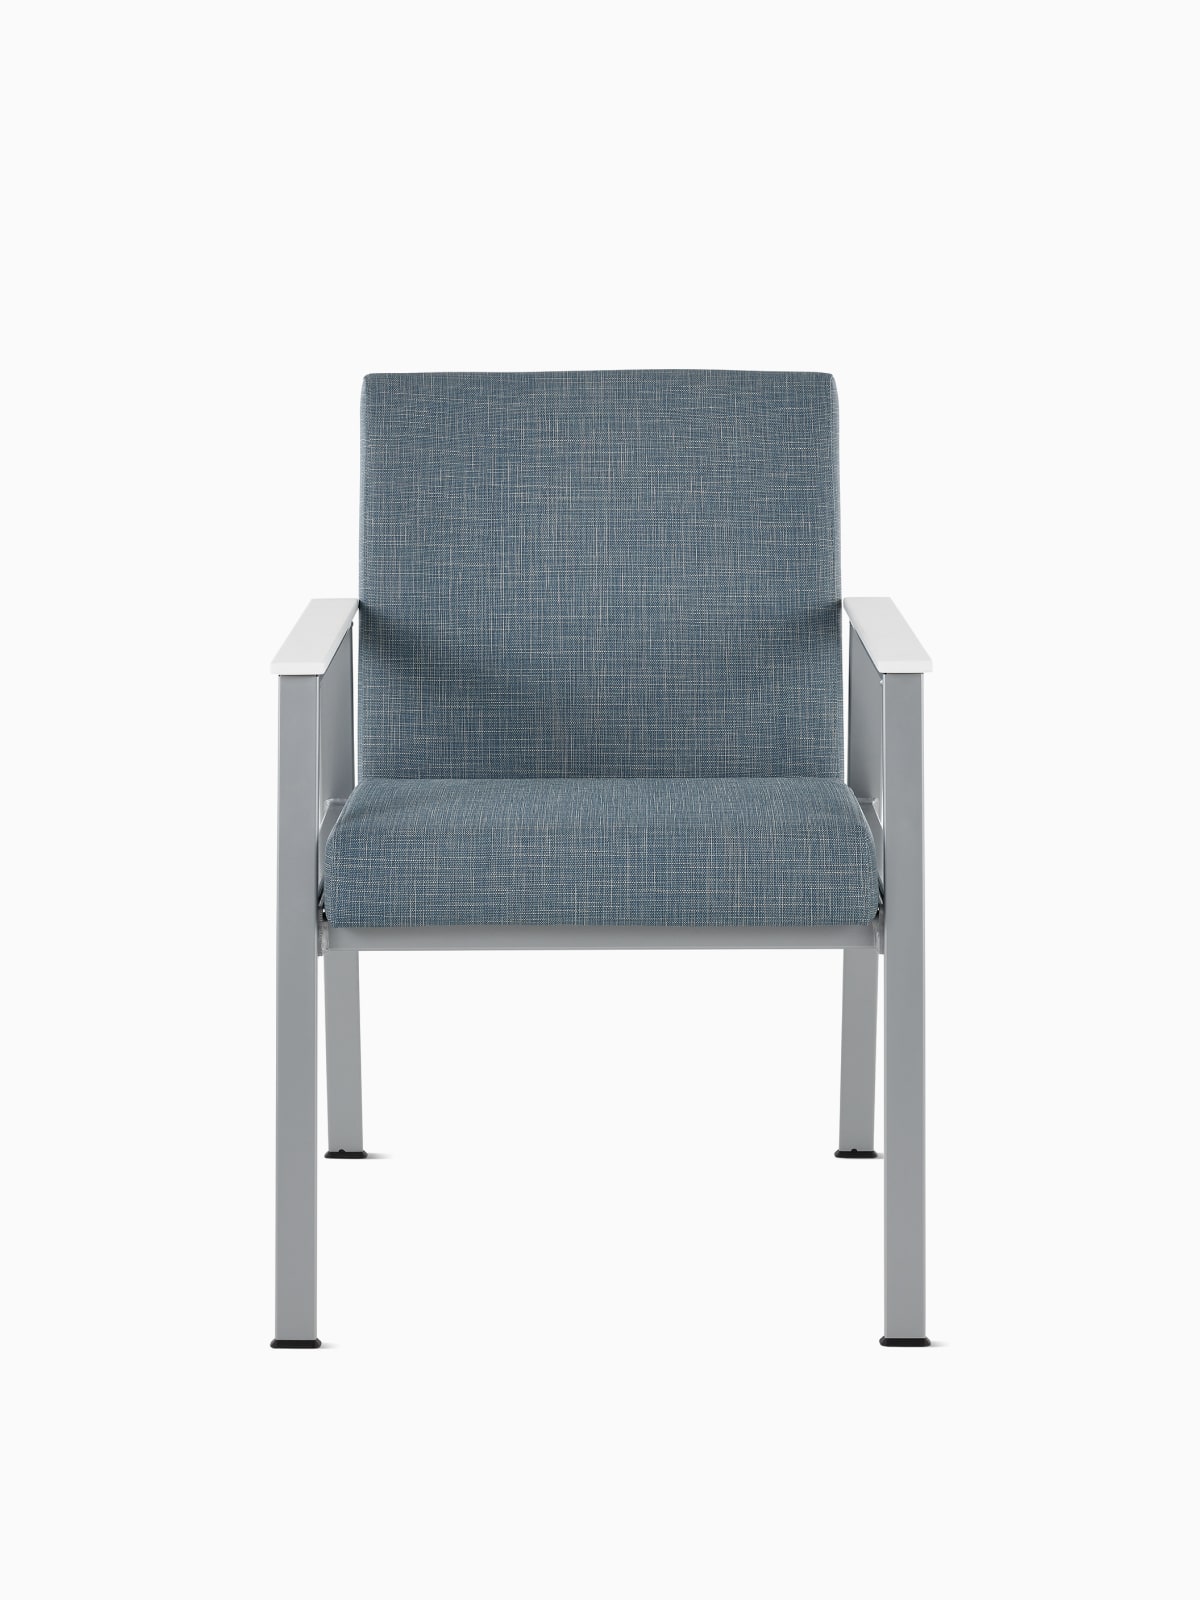 Front view of an Easton Side Chair with blue upholstery, metallic silver four-leg base, and glacier white Corian arm caps.